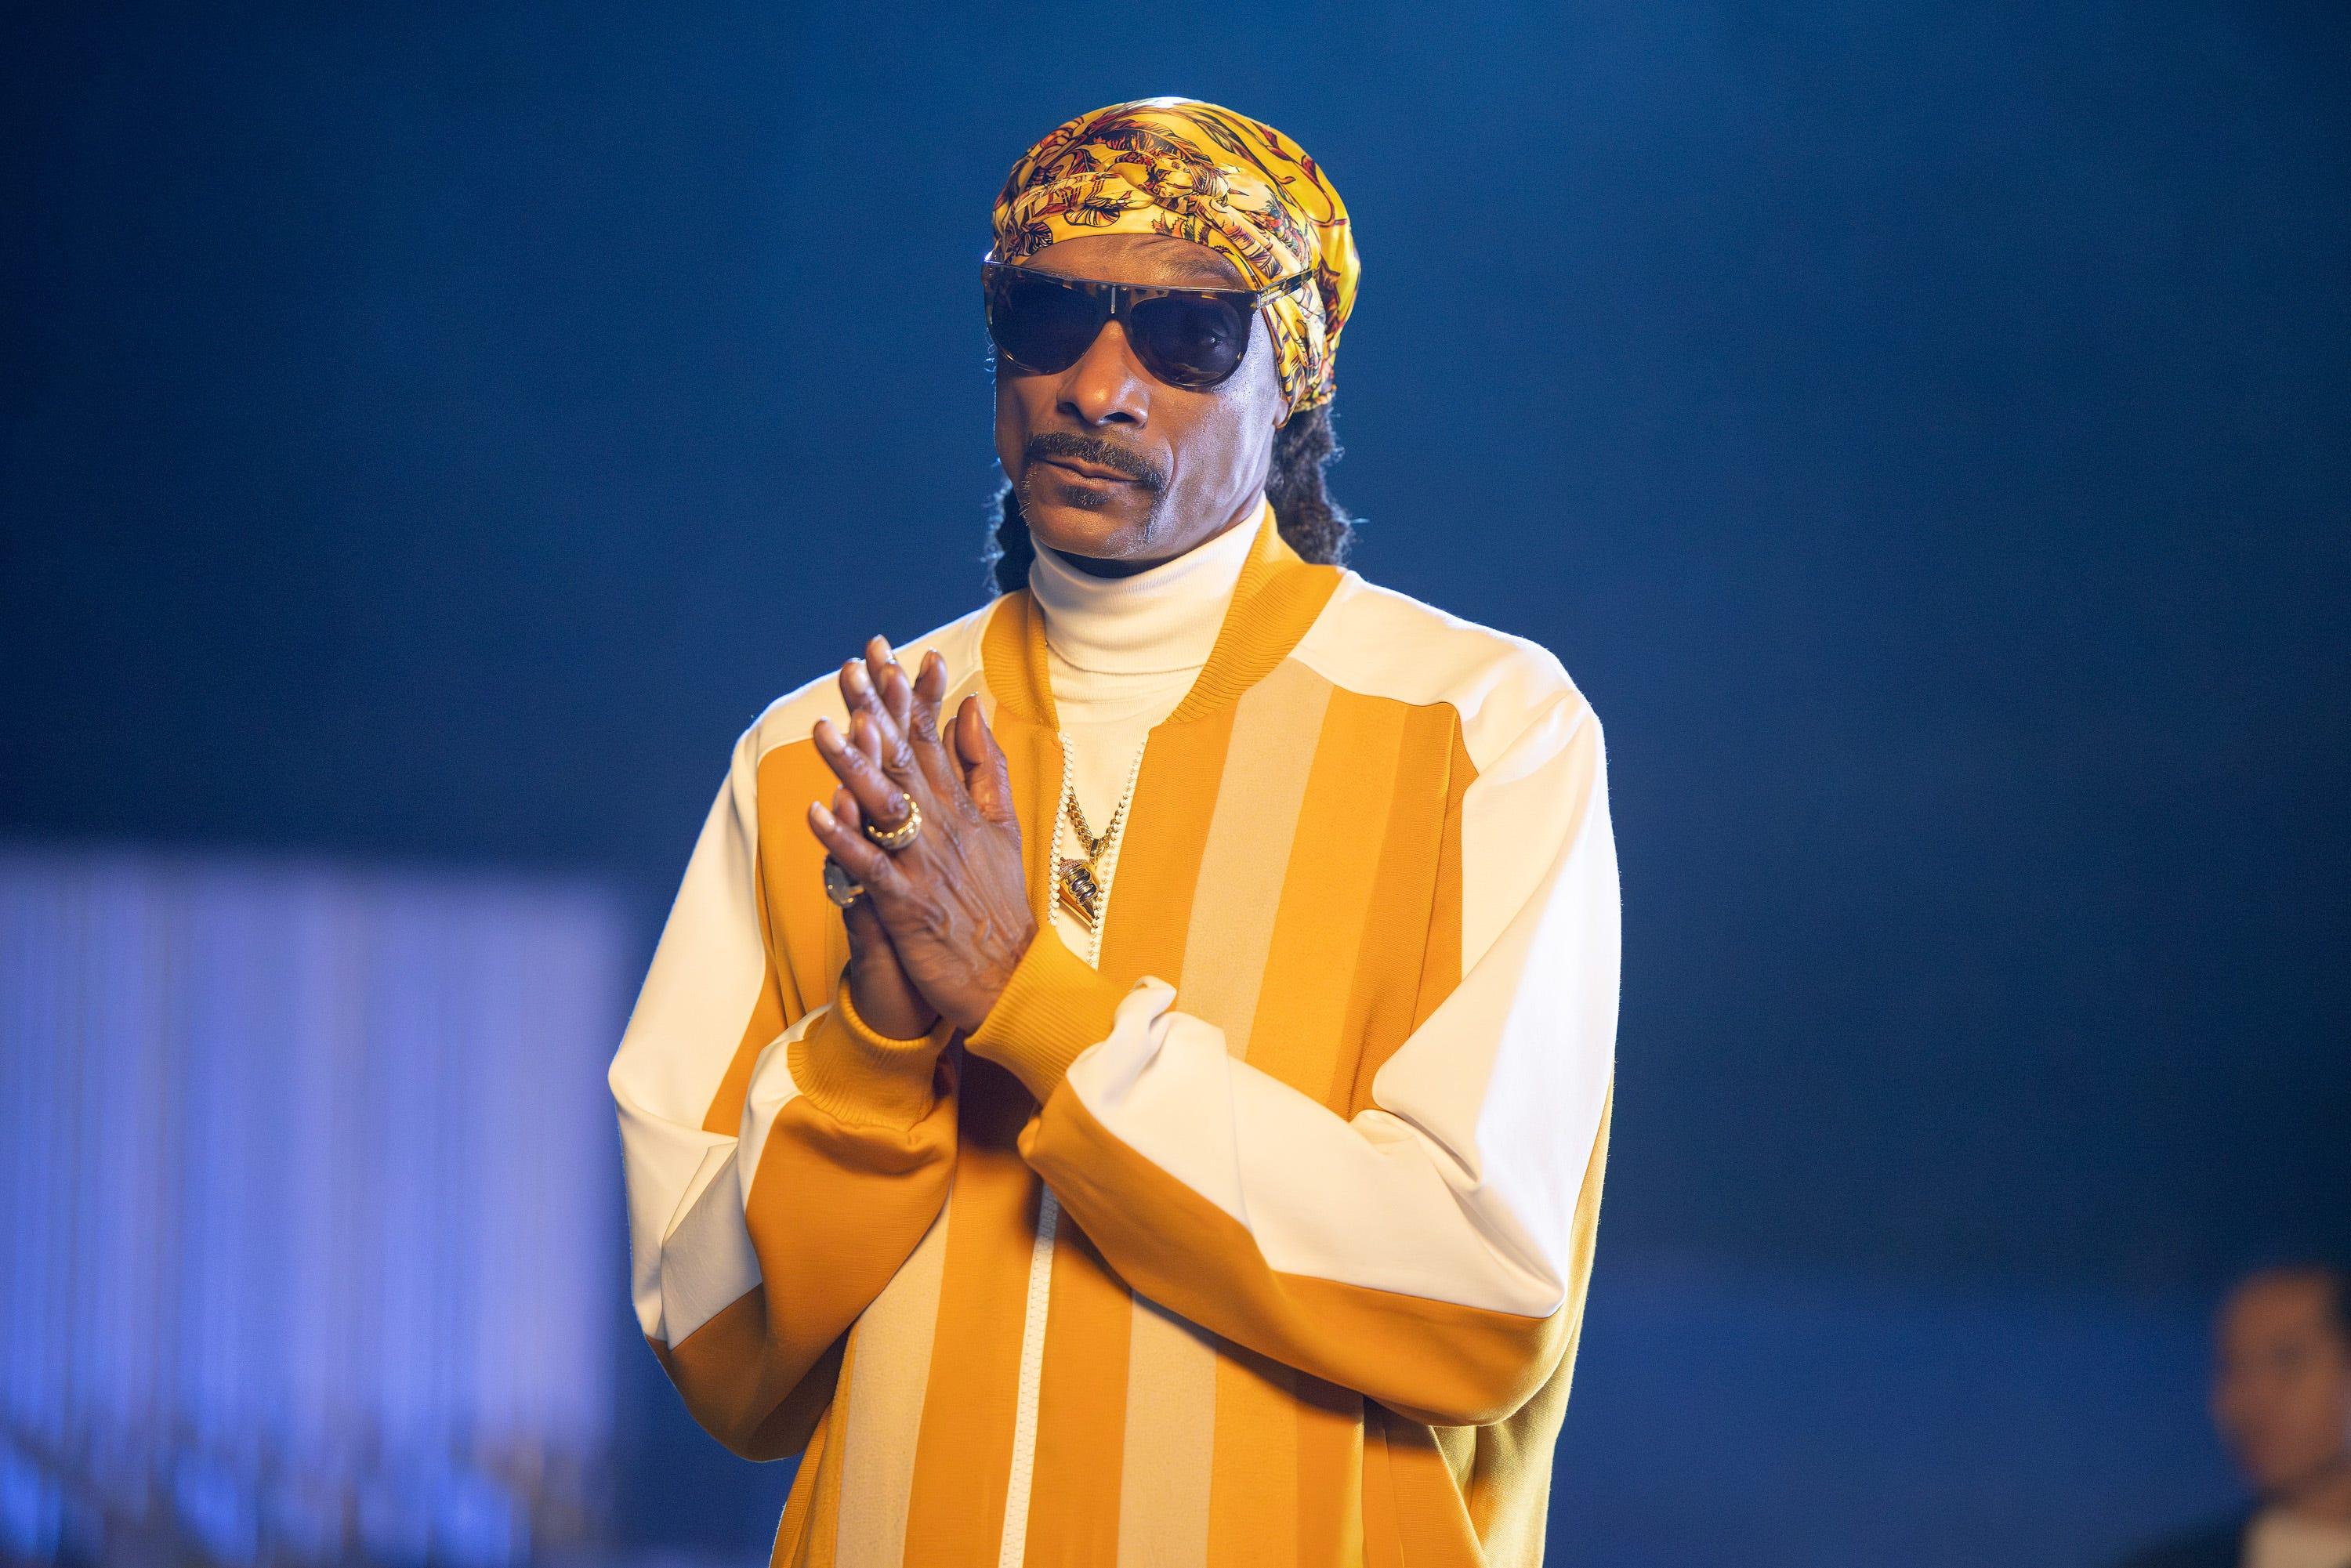 Snoop Dogg lays down a handful of verses about football for the anthem.